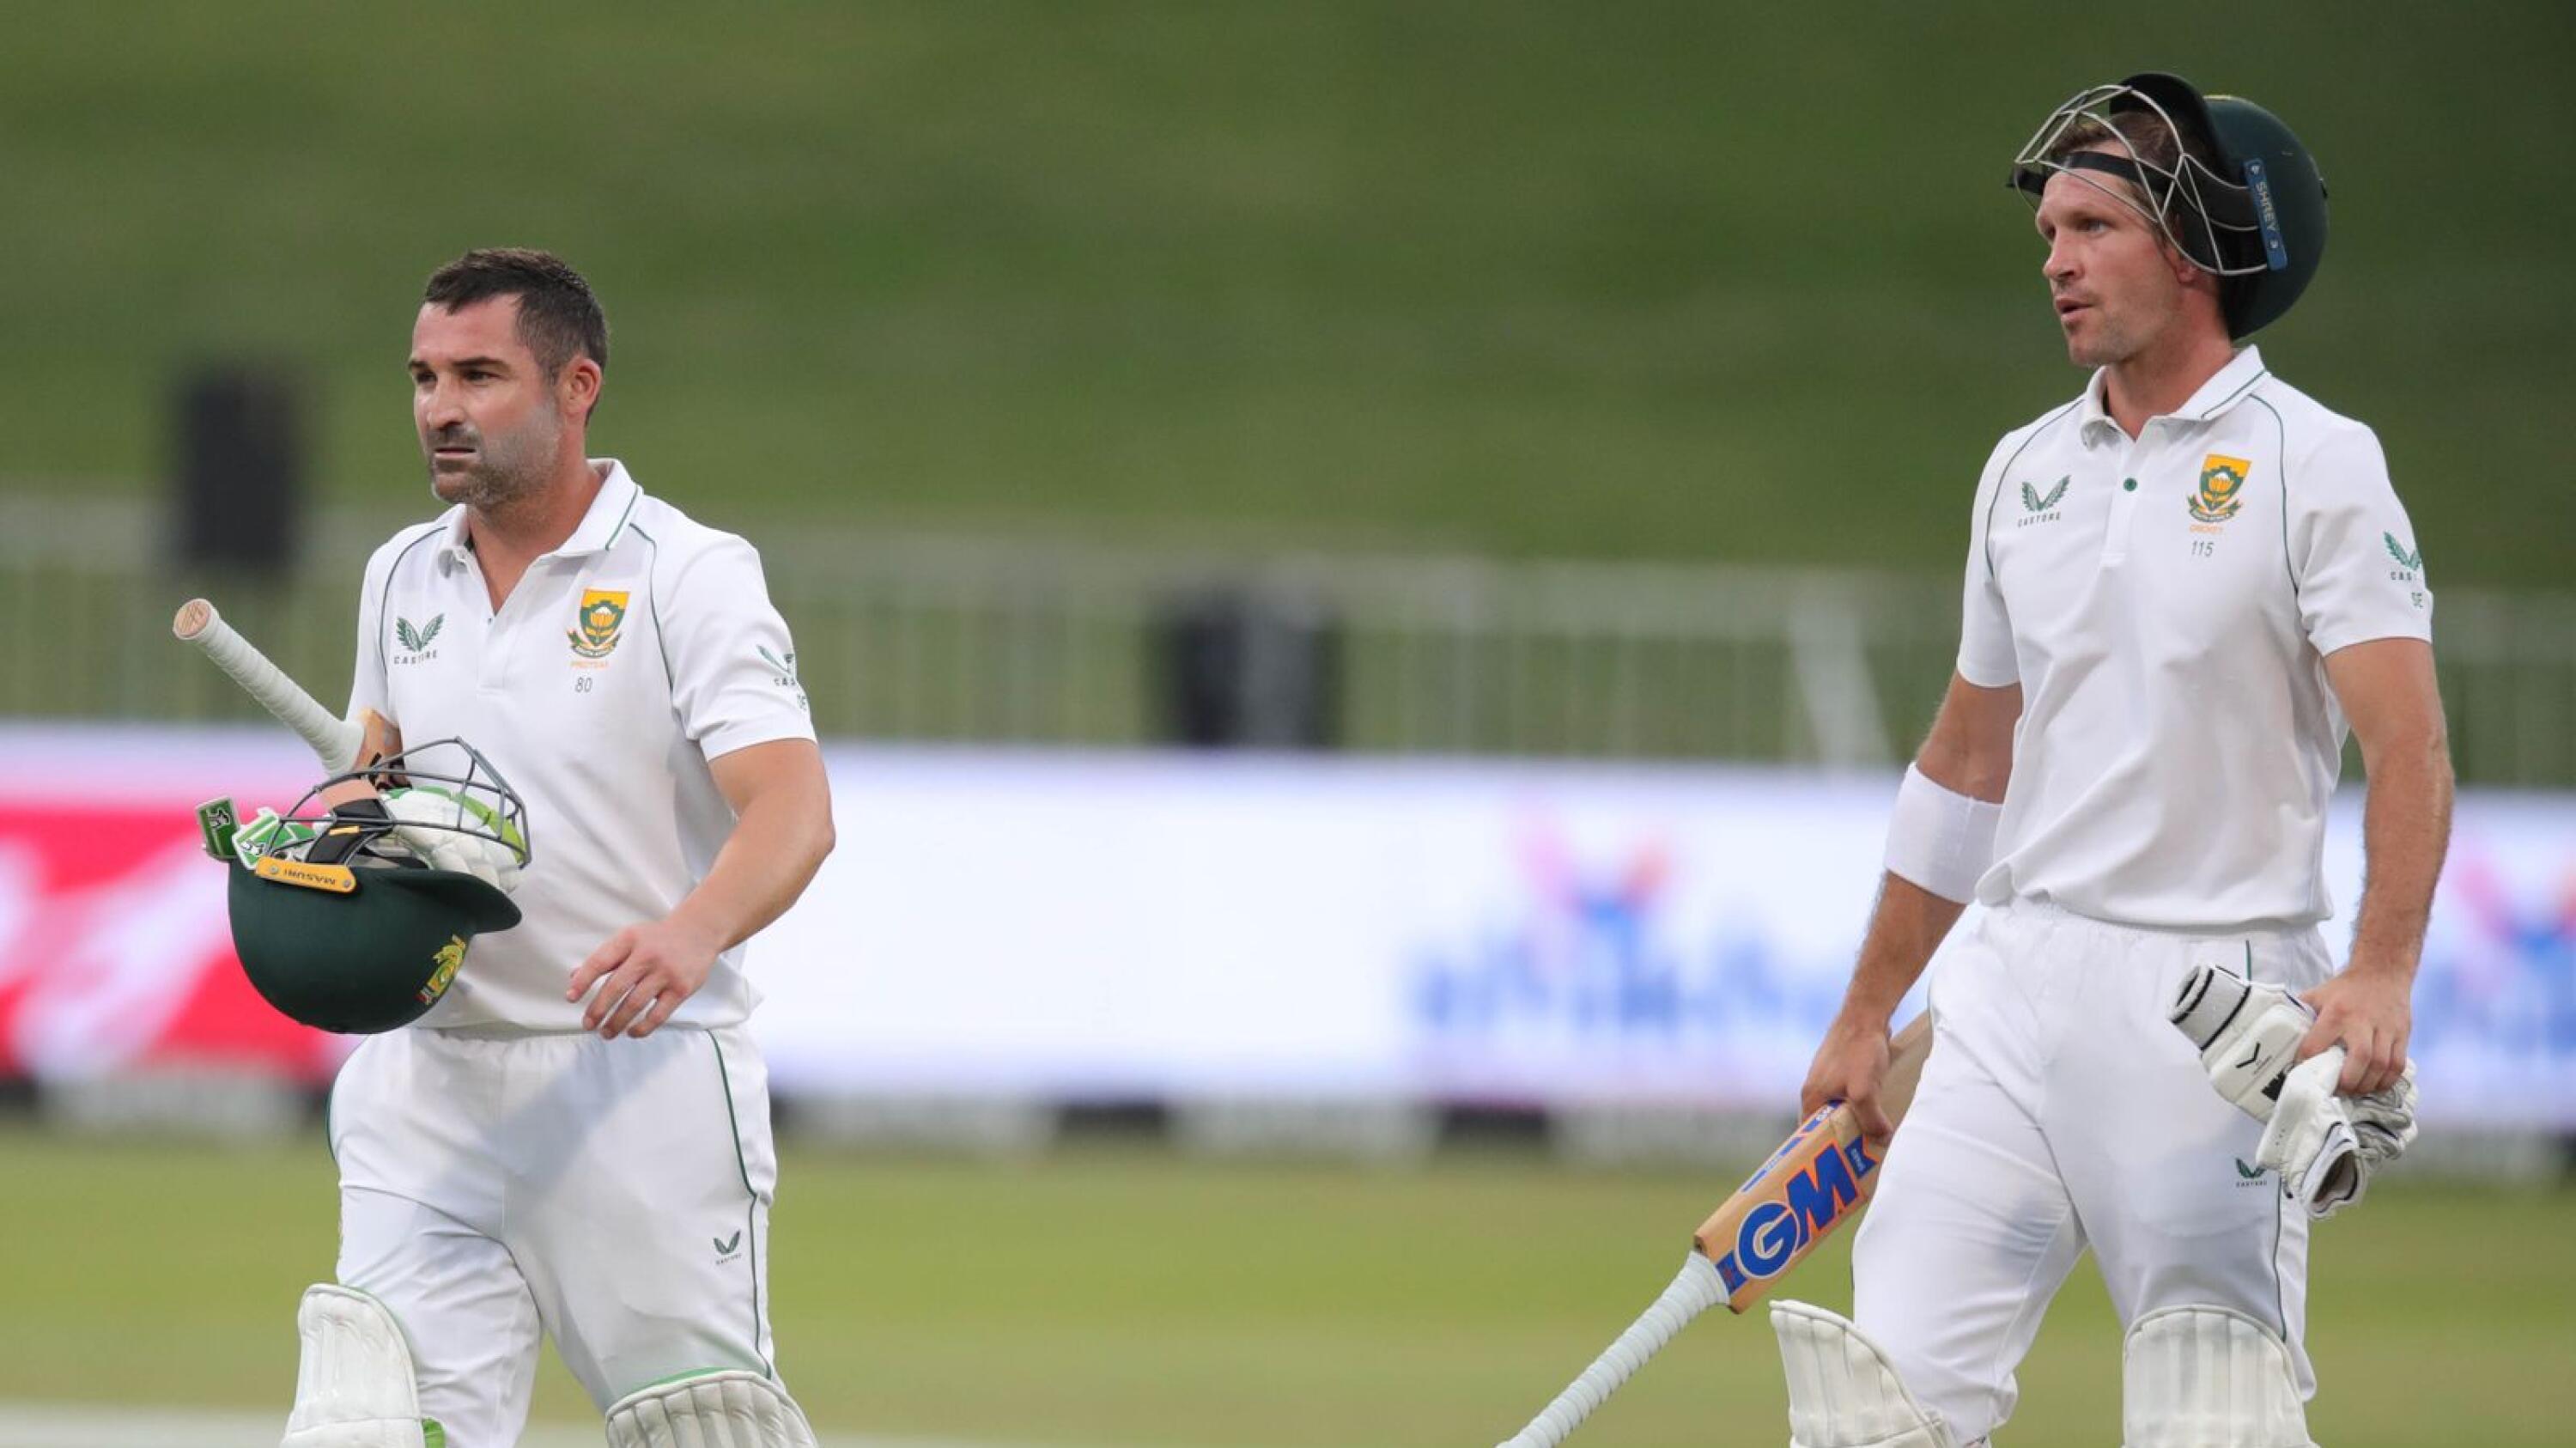 Proteas openers Dean Elgar and Sarel Erwee walk off the field at the end of the day on day three of the first Test against Bangladesh at Kingsmead Stadium in Durban on Saturday